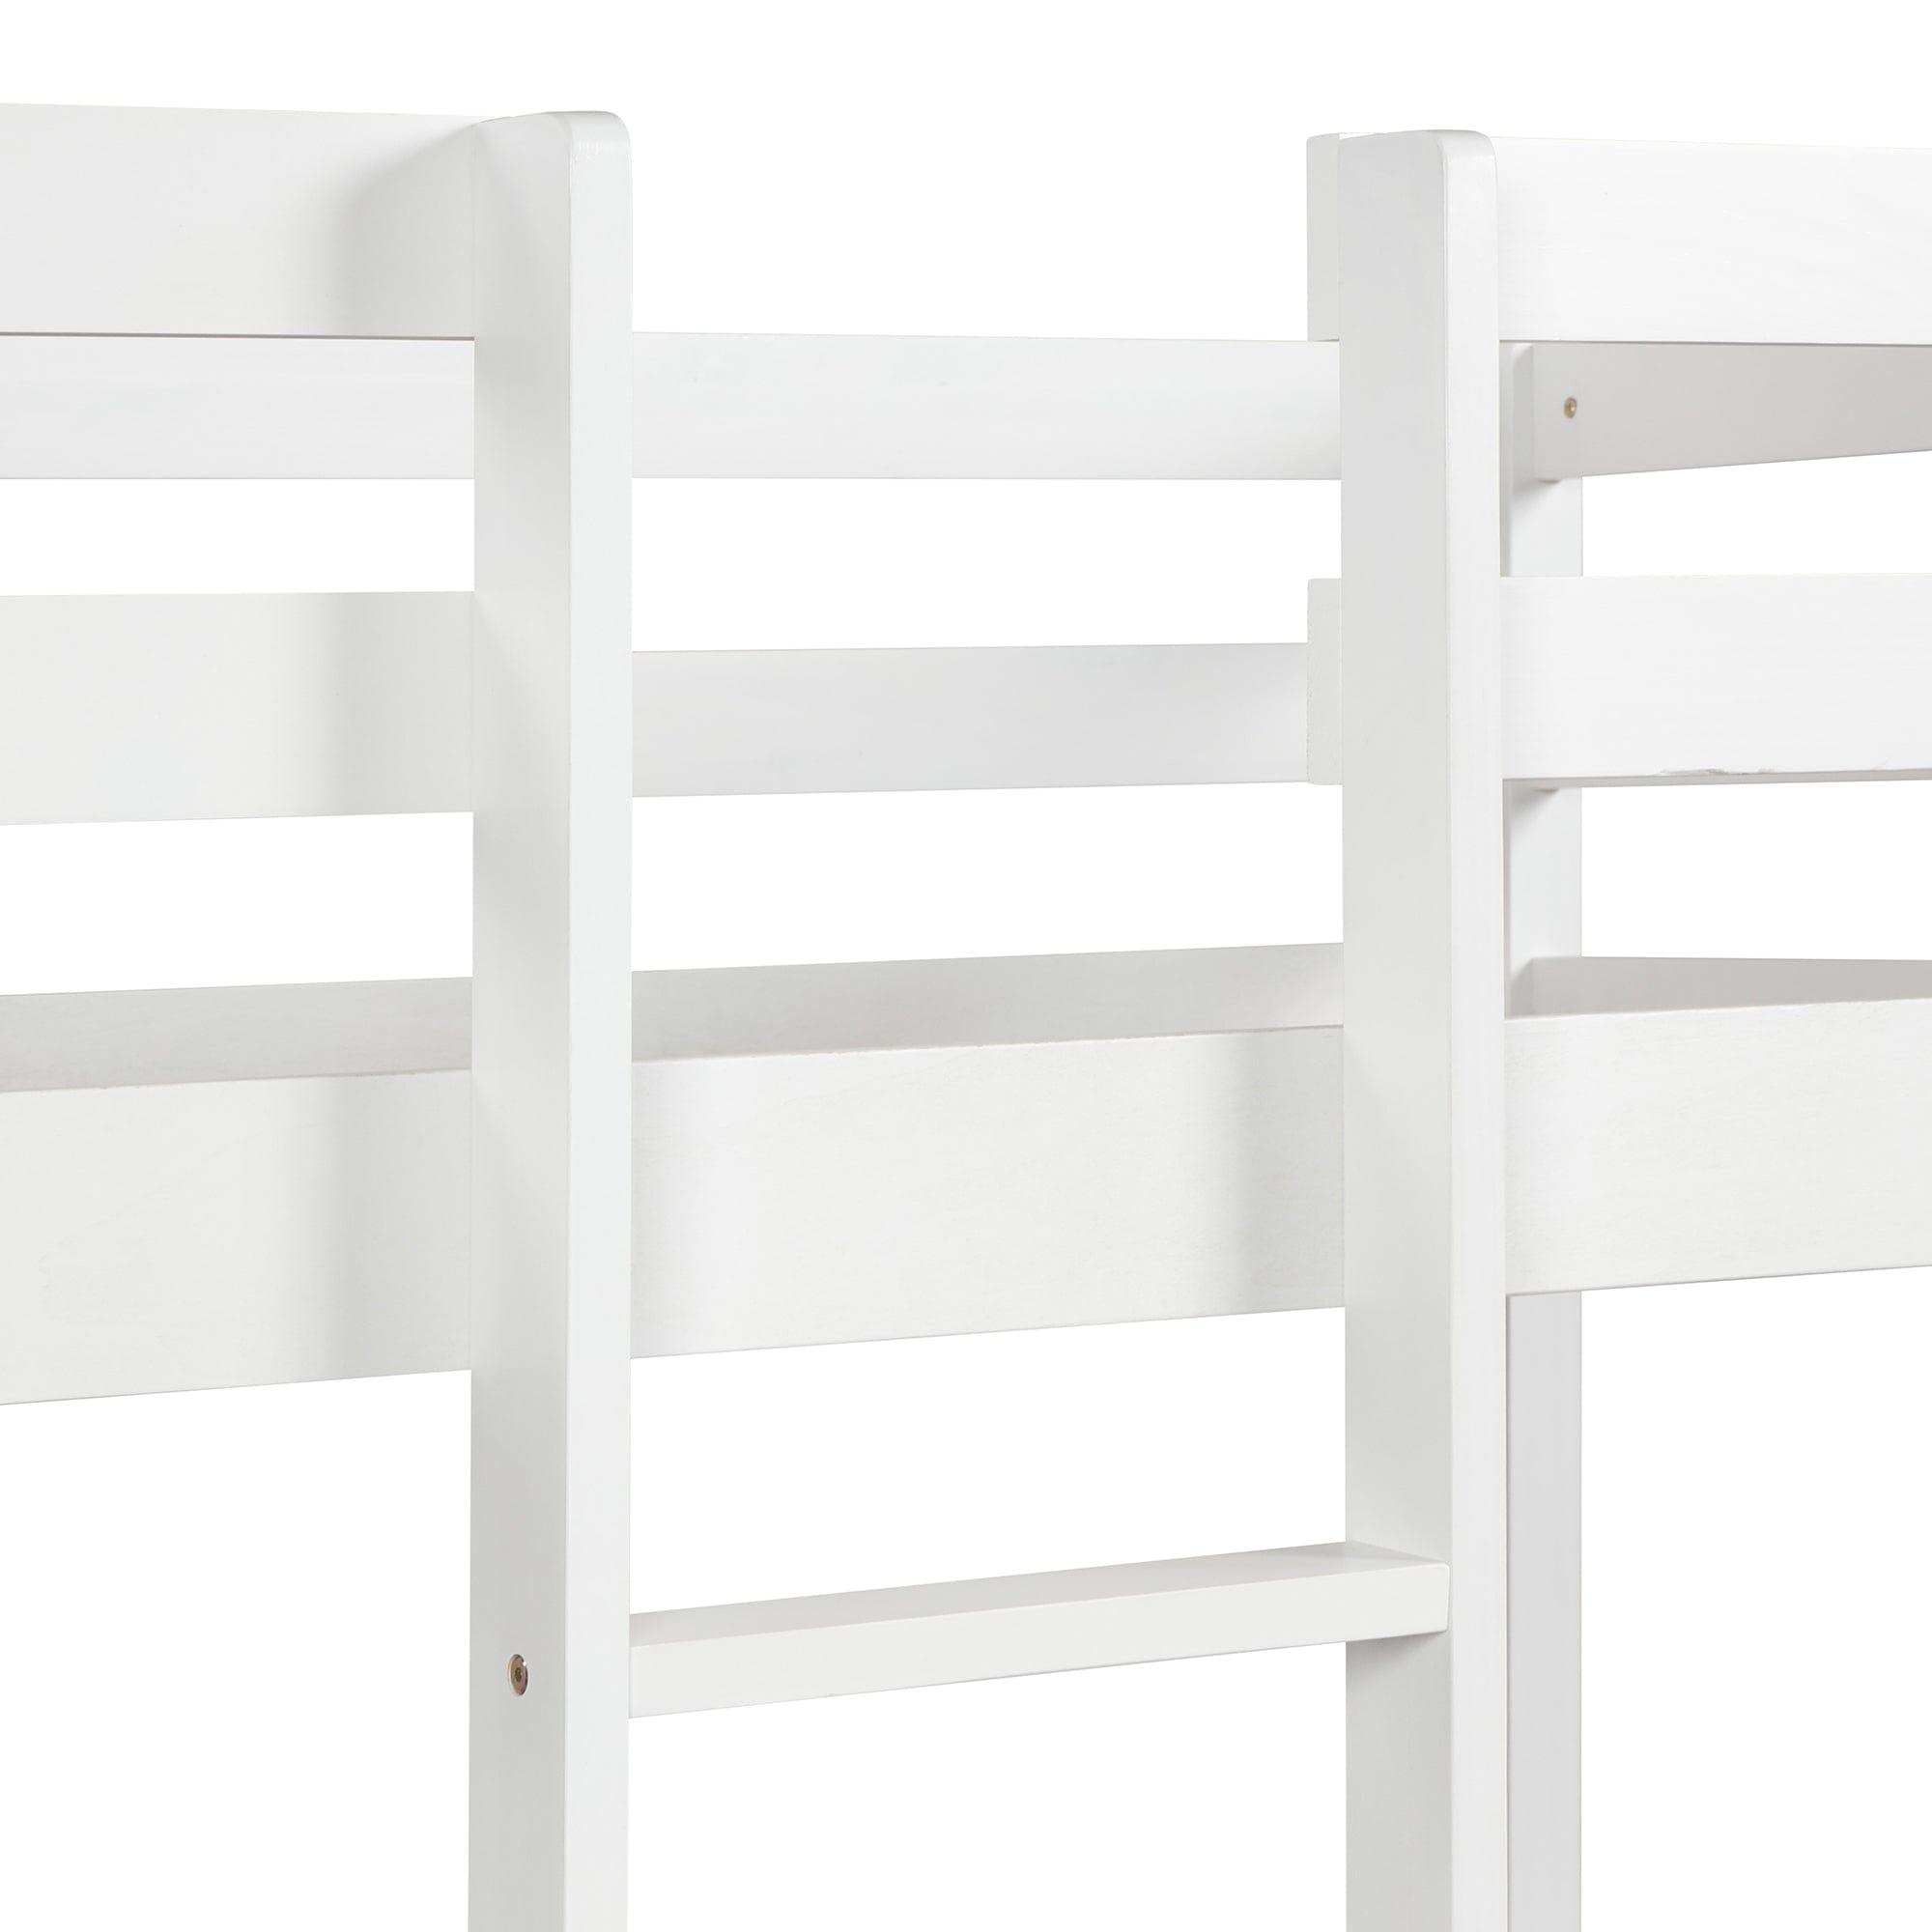 Shop Functional Loft Bed (turn into upper bed and down desk，cushion sets are free),Twin Size,White Mademoiselle Home Decor